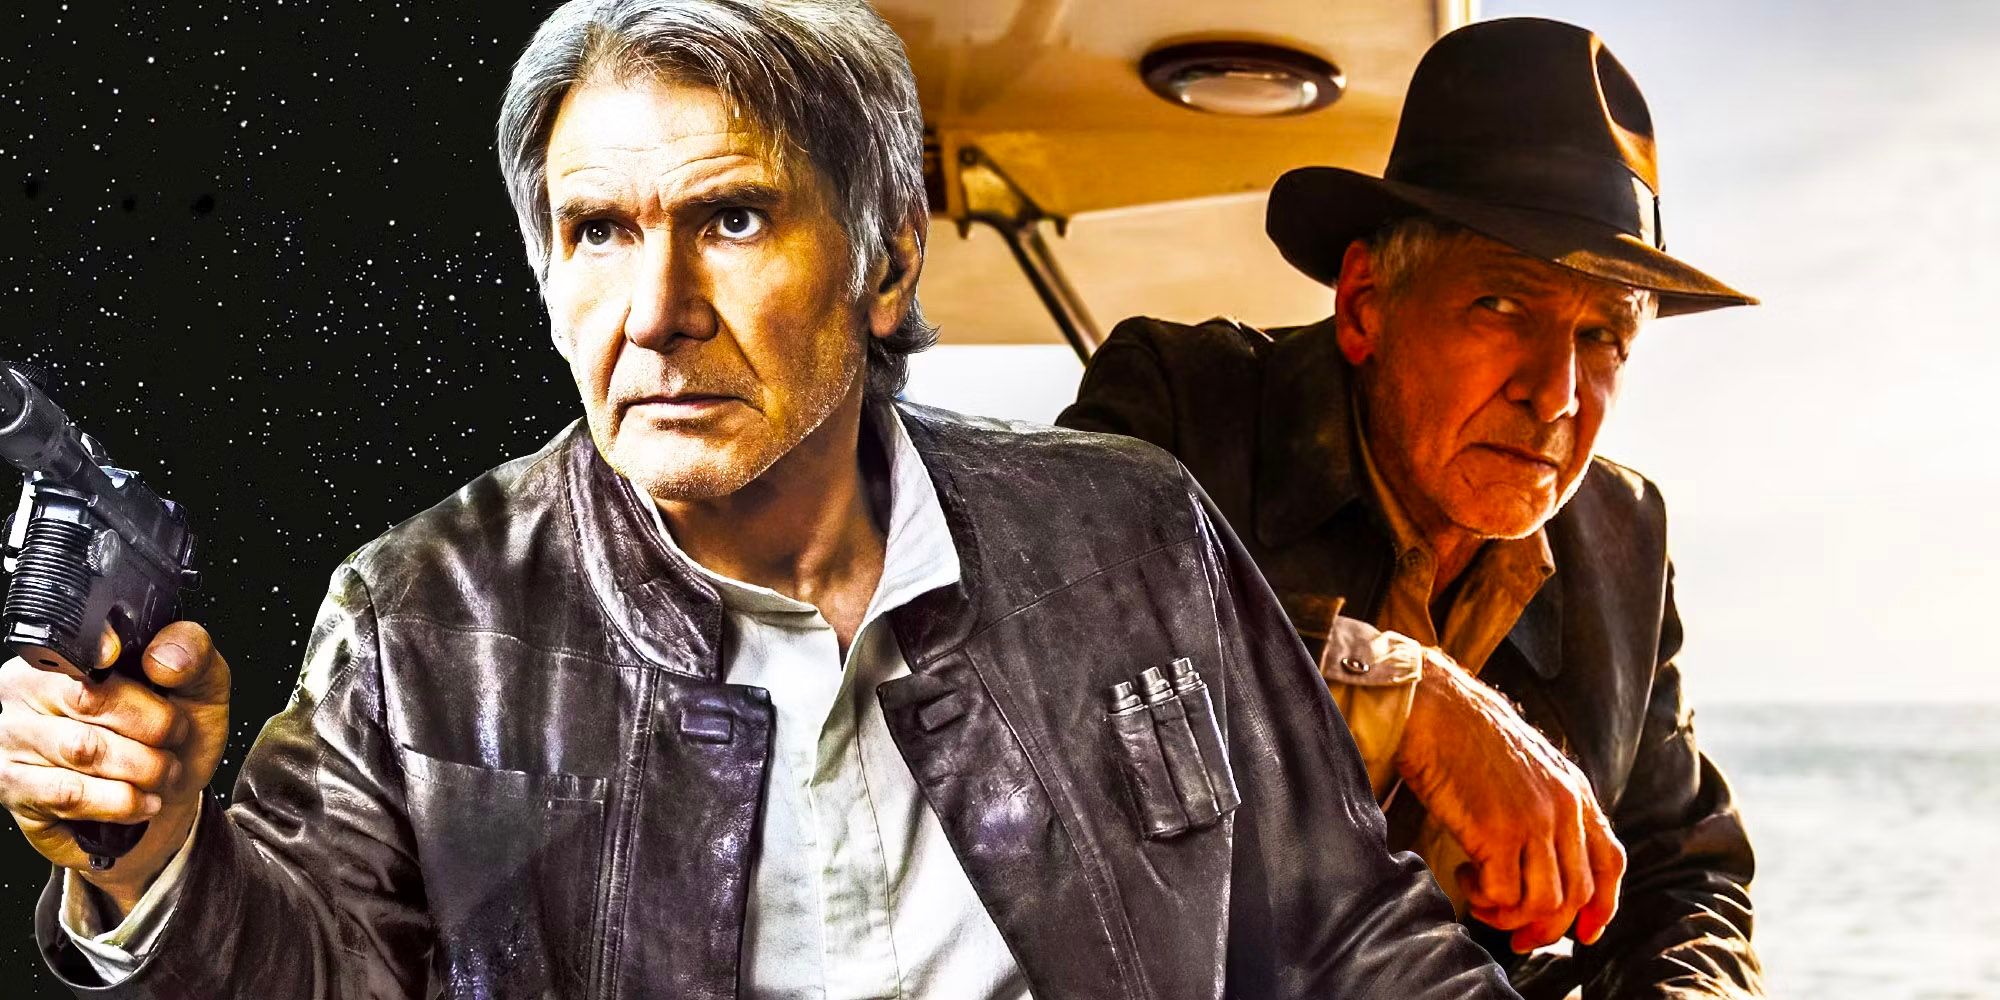 Harrison Ford as Han Solo and Indiana Jones.